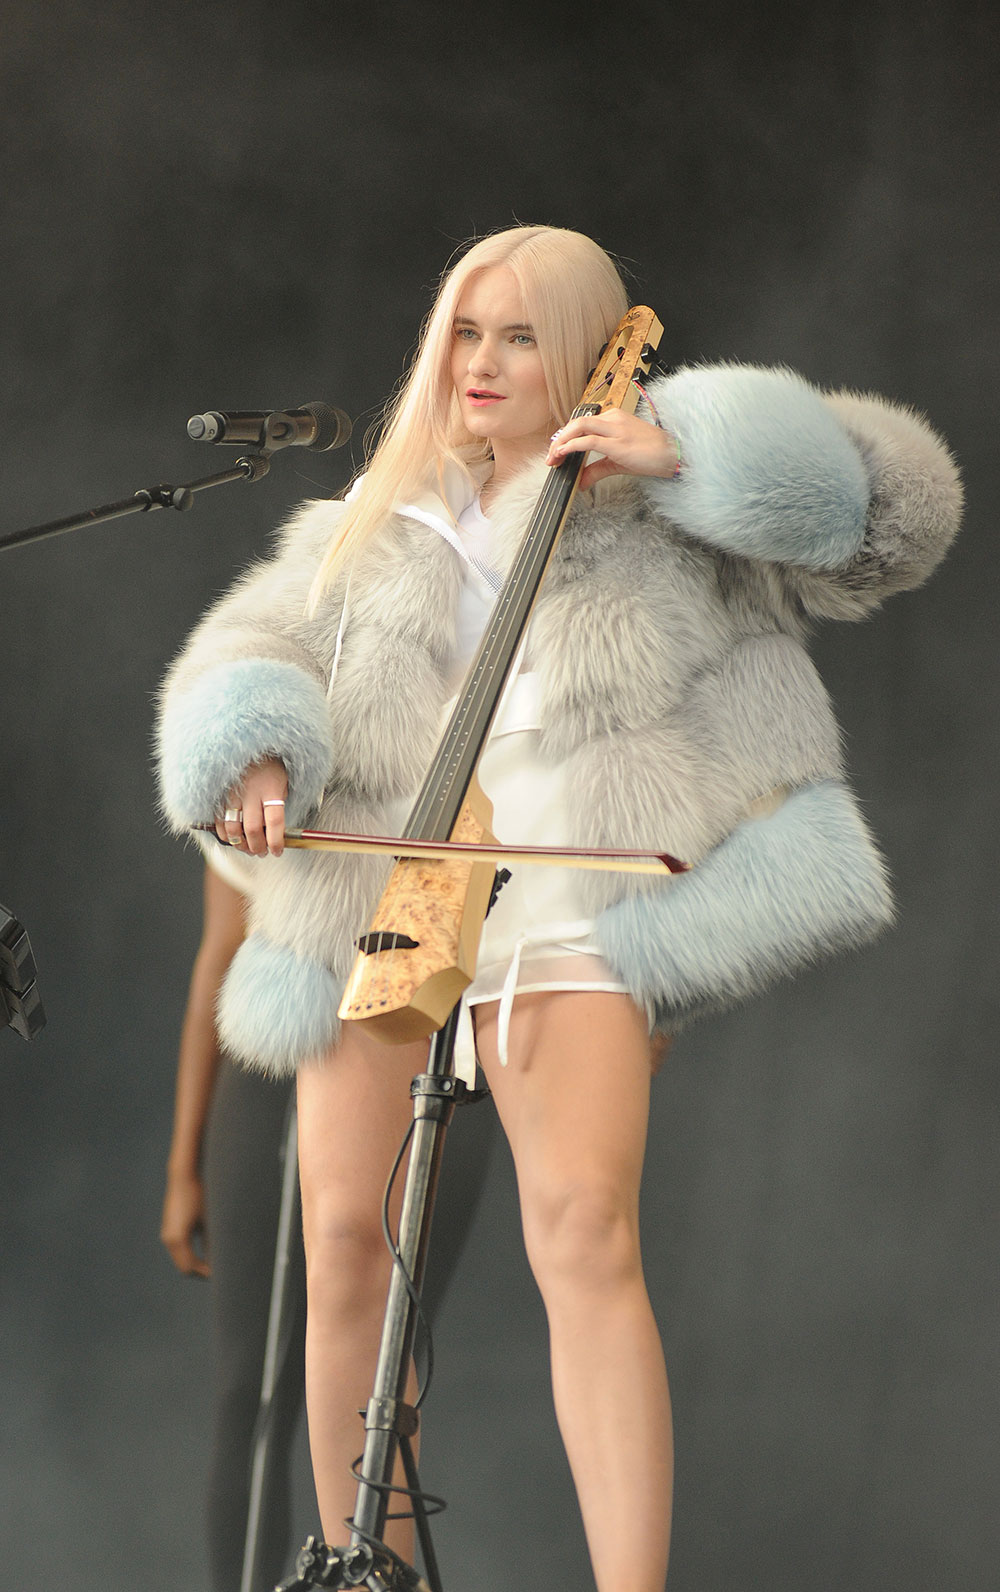 Grace Chatto of Clean Bandit performs at Glastonbury